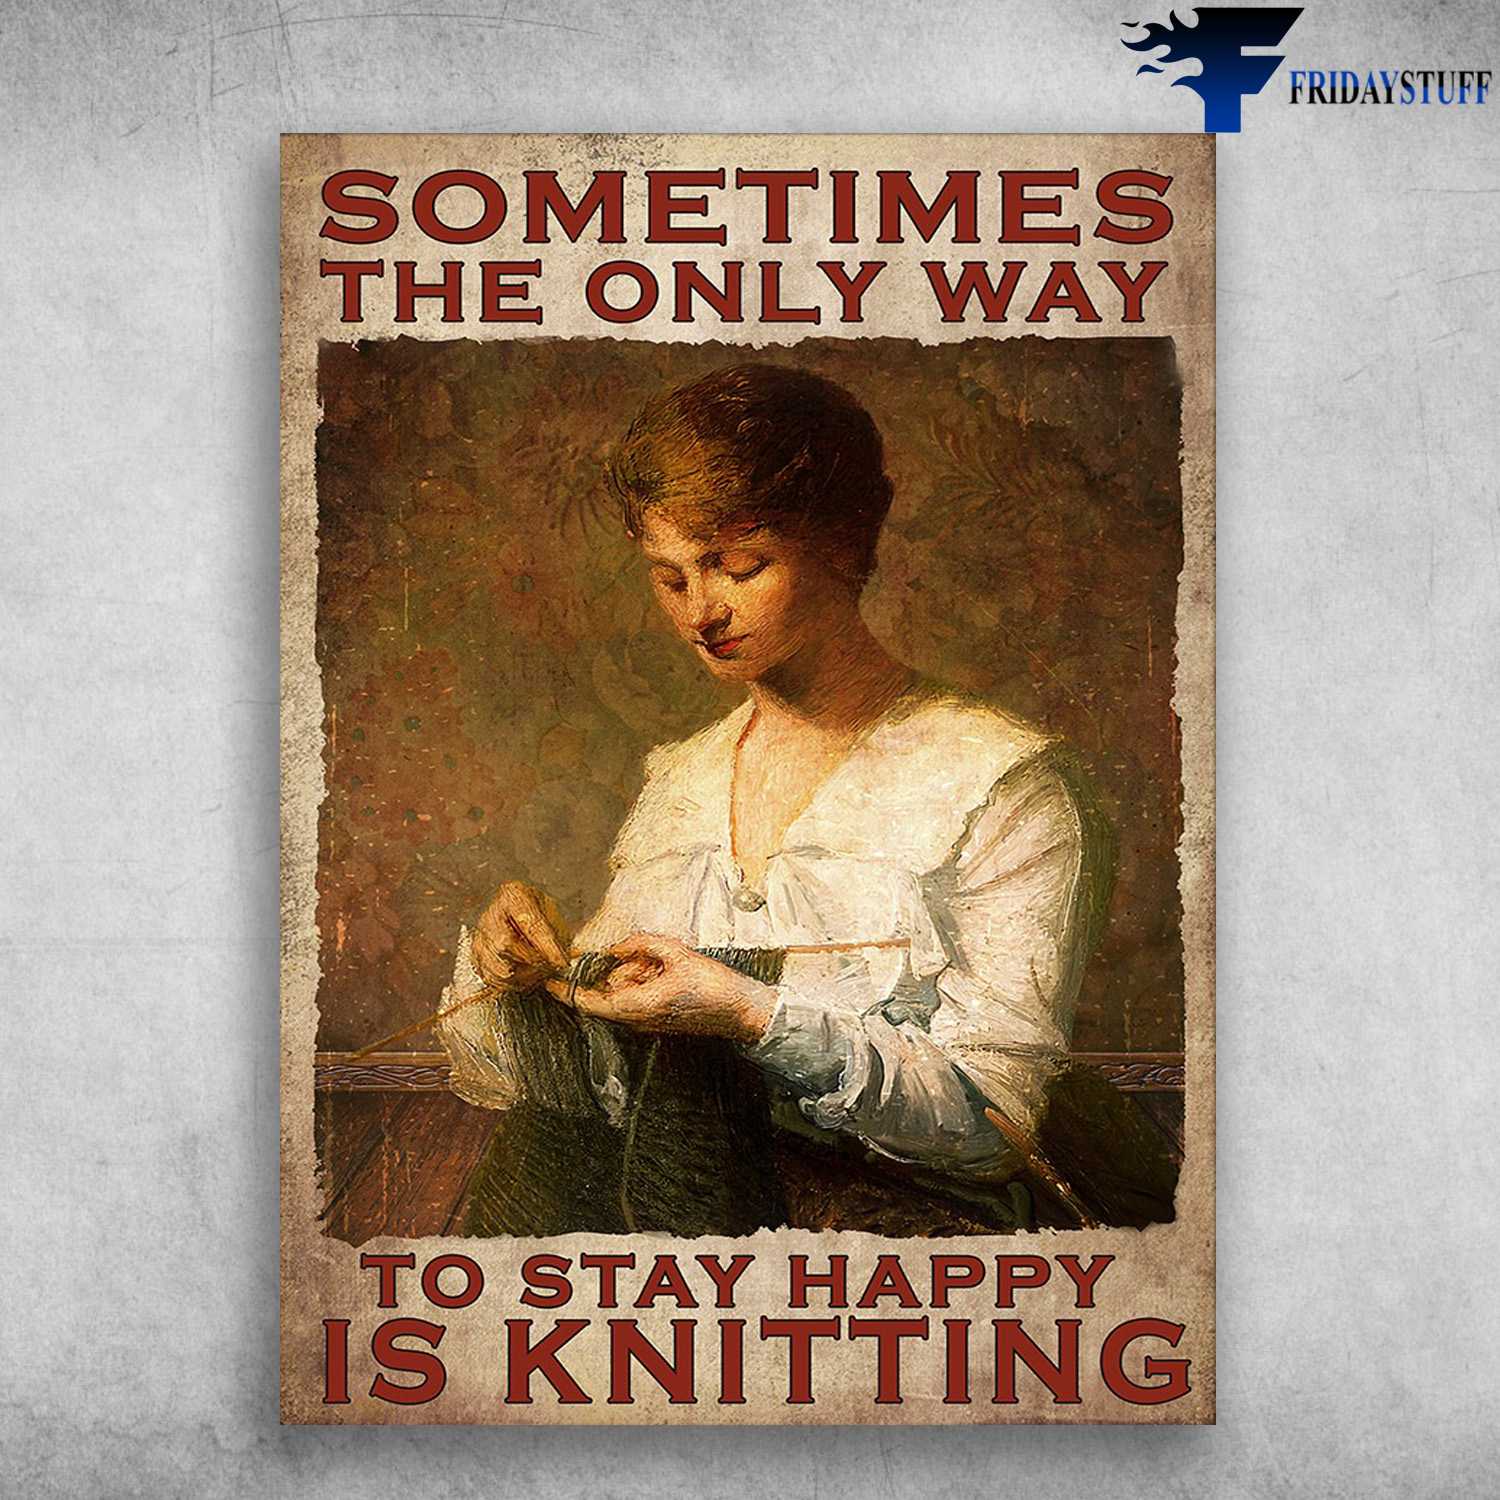 Knitting Girl - Sometimes The Only Way, To Stay Happy Is Knitting